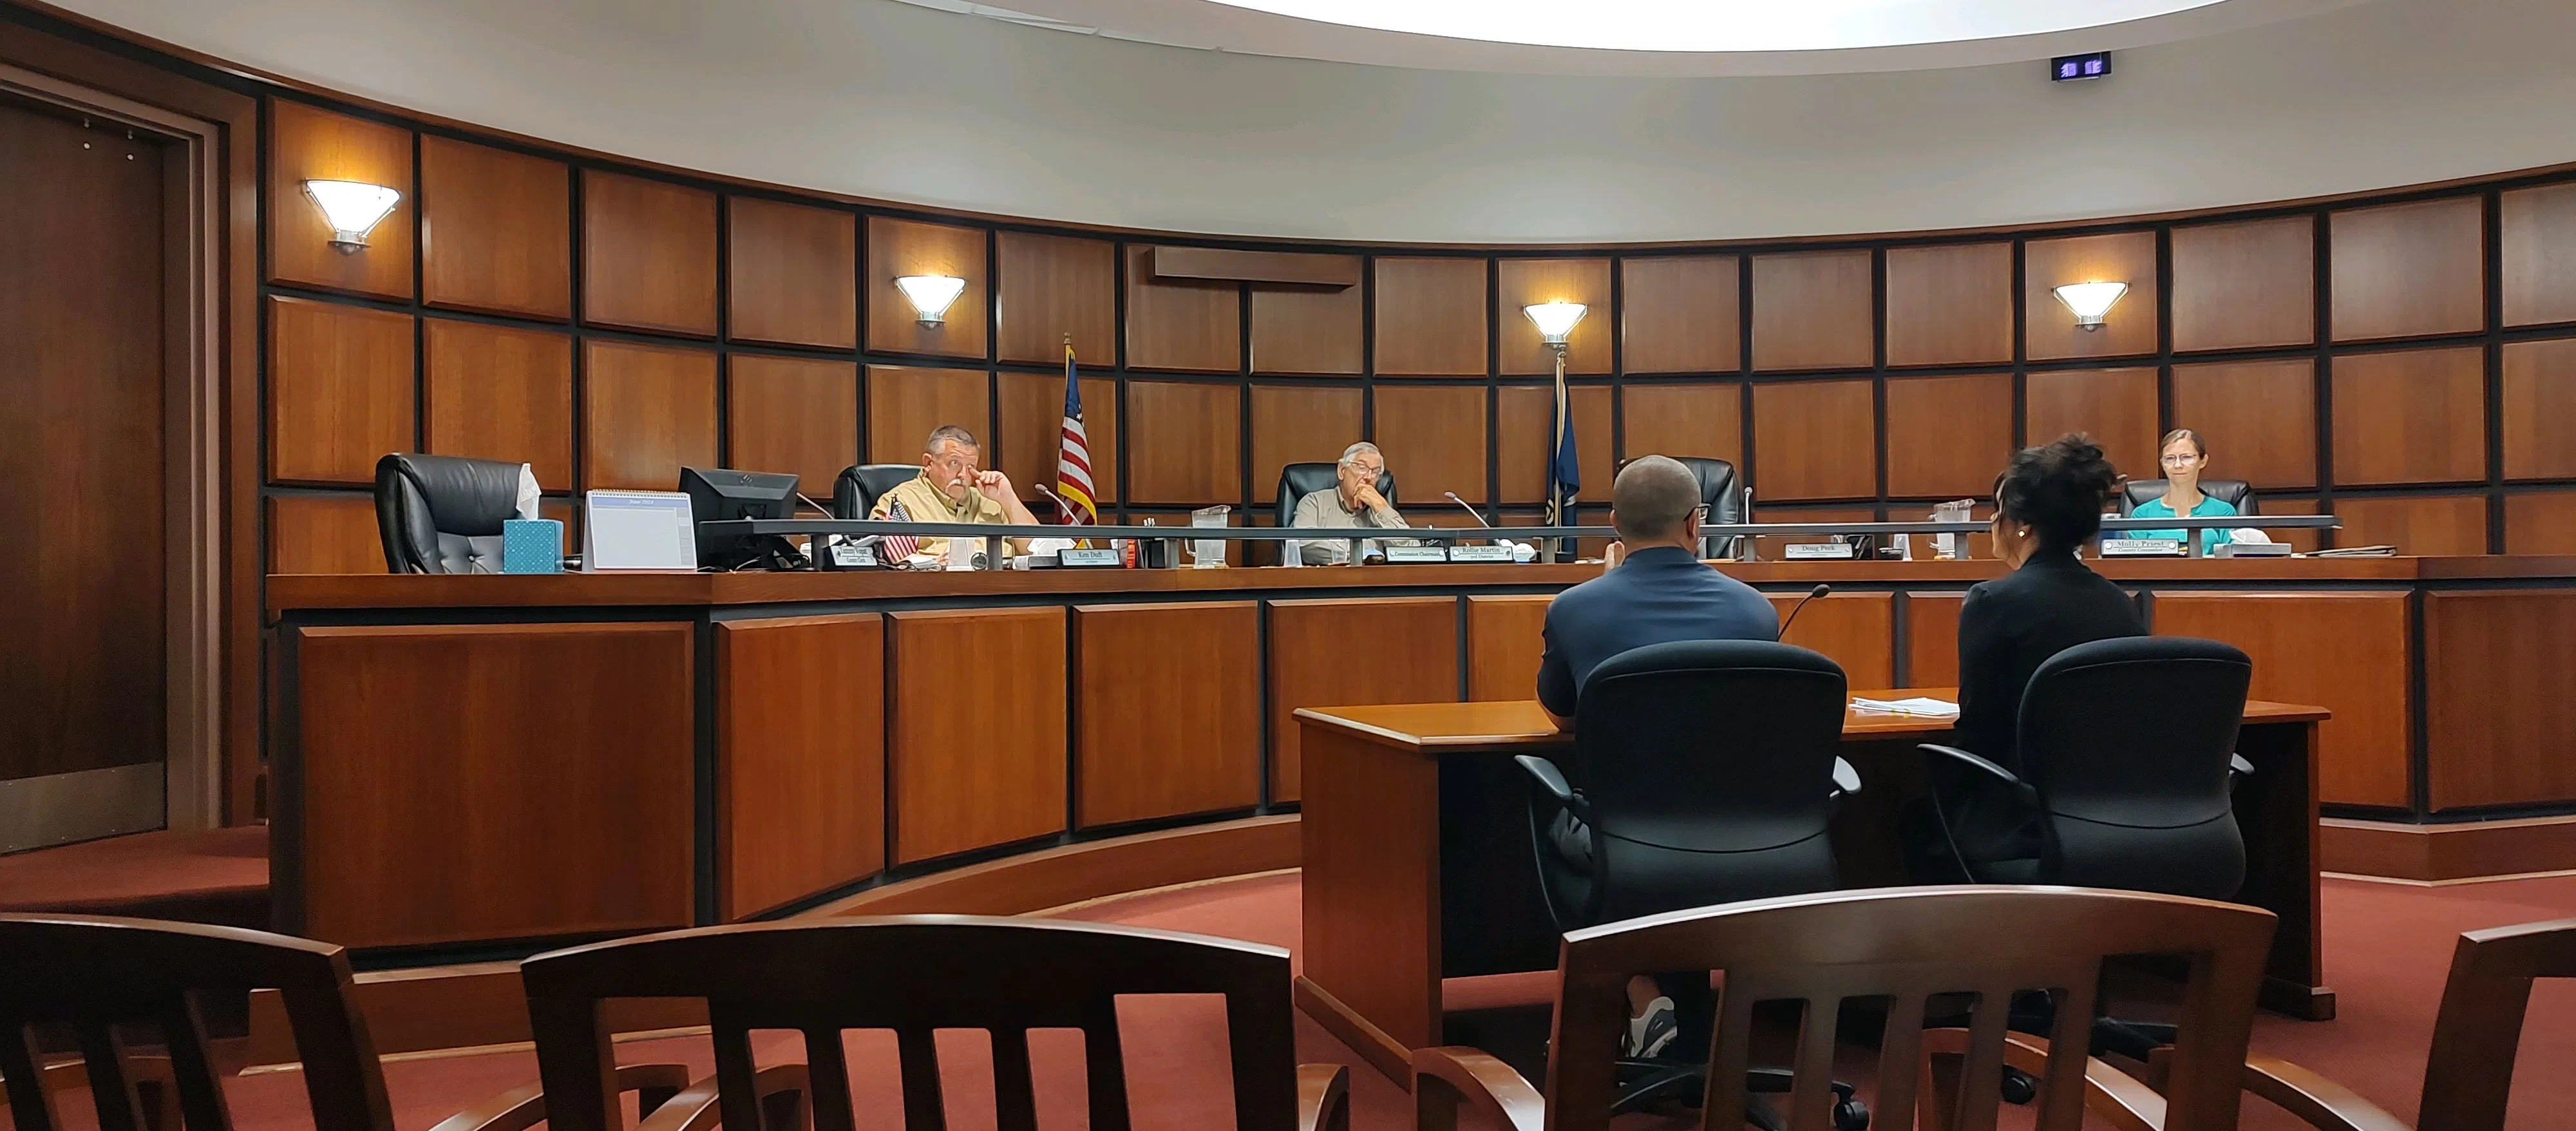 'Reasonable and well thought out:' County Commission Chairman offers thoughts on budget requests thus far with many more set to come